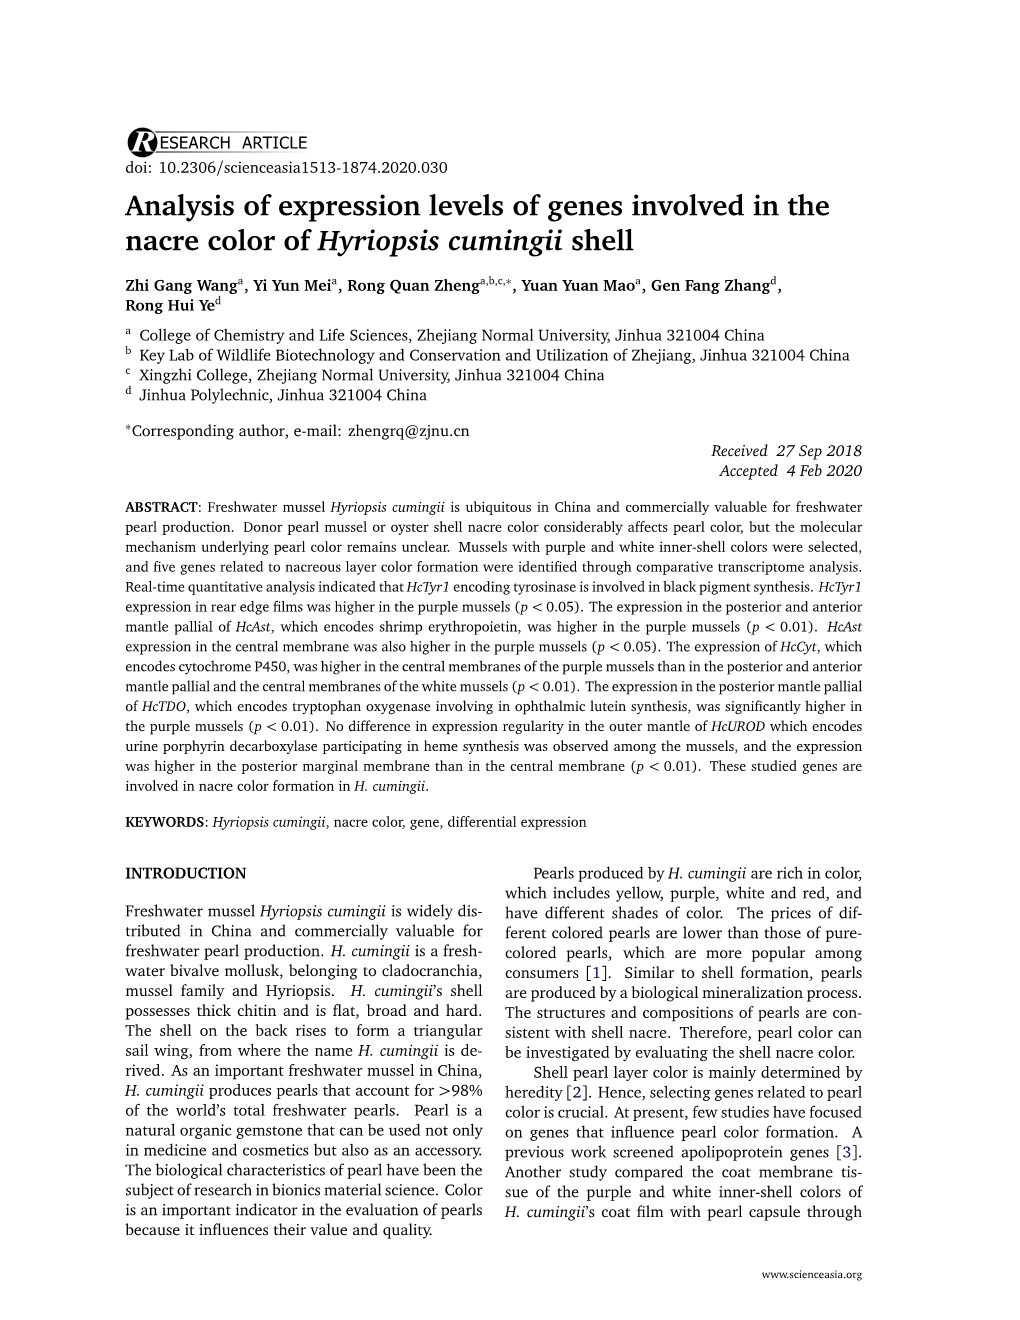 Analysis of Expression Levels of Genes Involved in the Nacre Color of Hyriopsis Cumingii Shell